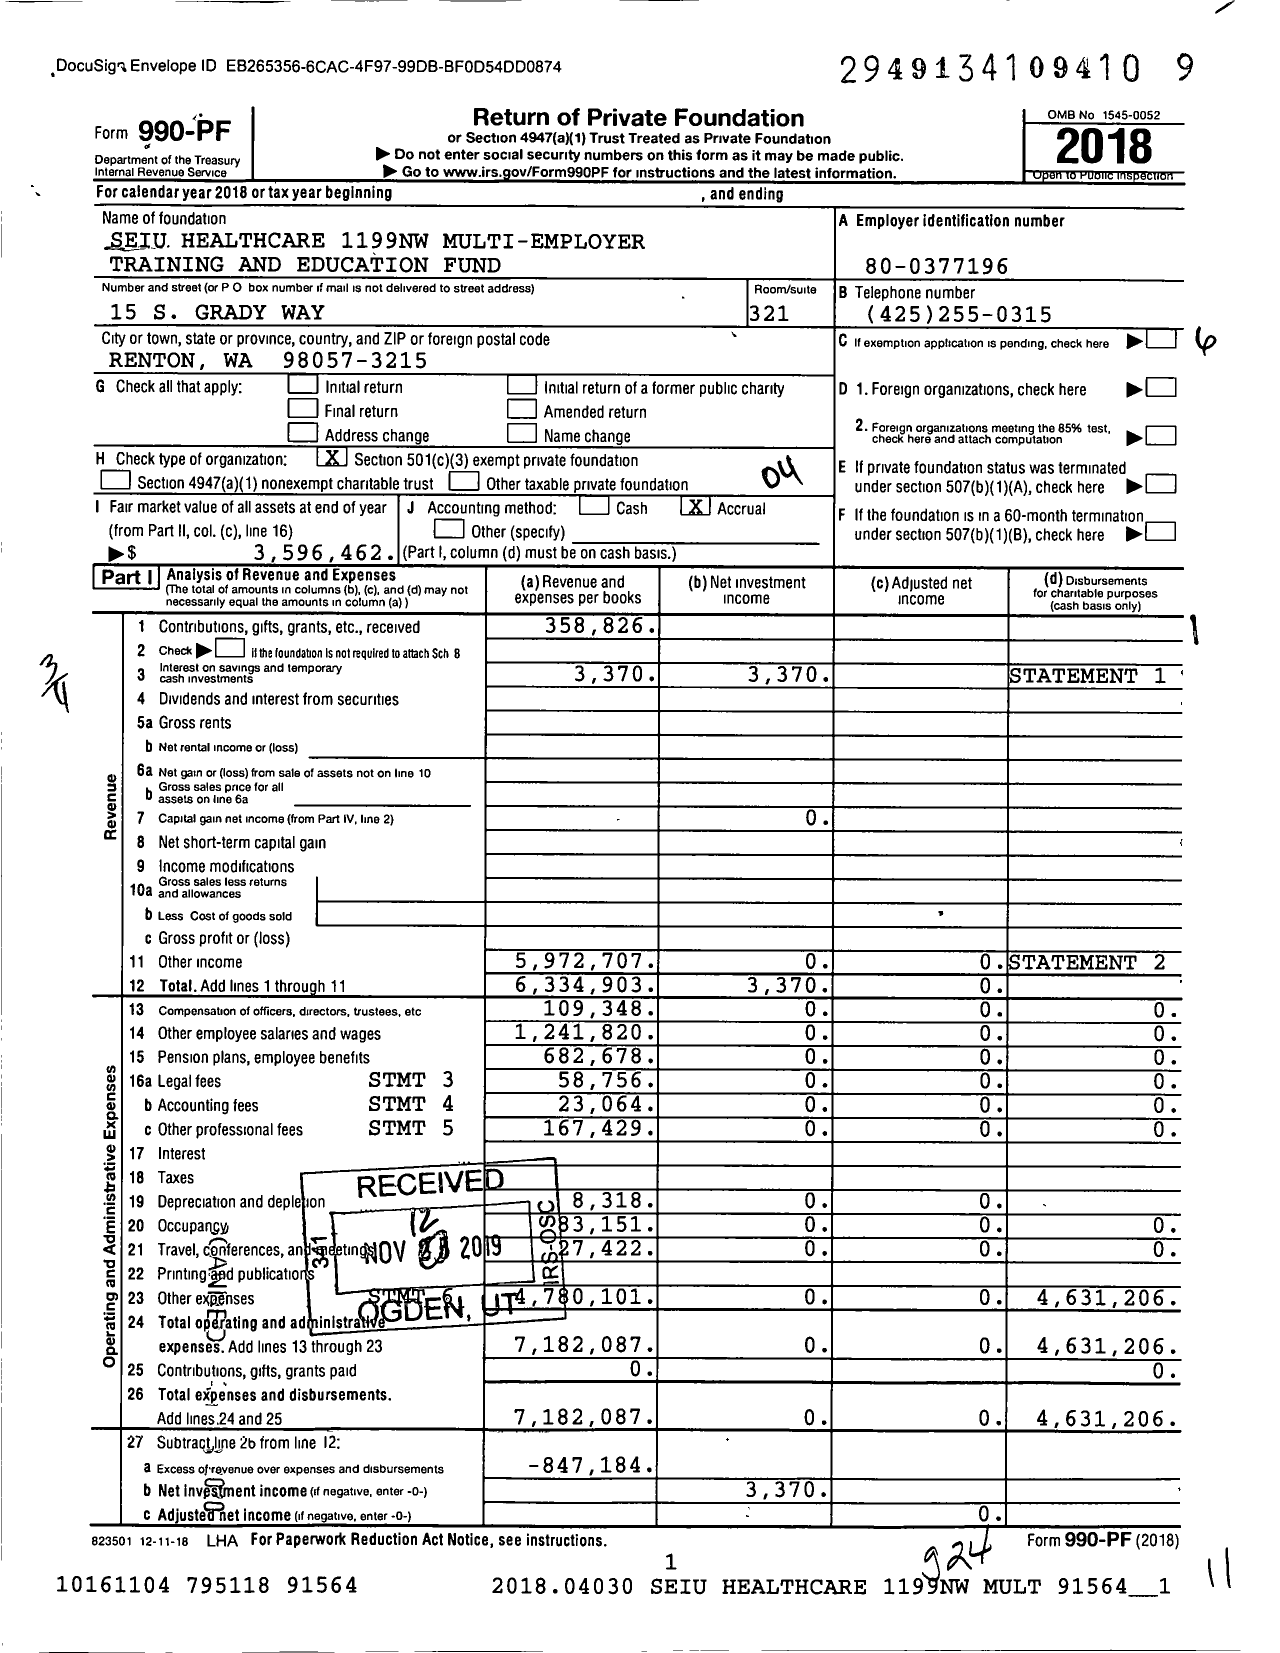 Image of first page of 2018 Form 990PF for Seiu Healthcare 1199nw Multi-Employer Training and Education Fund